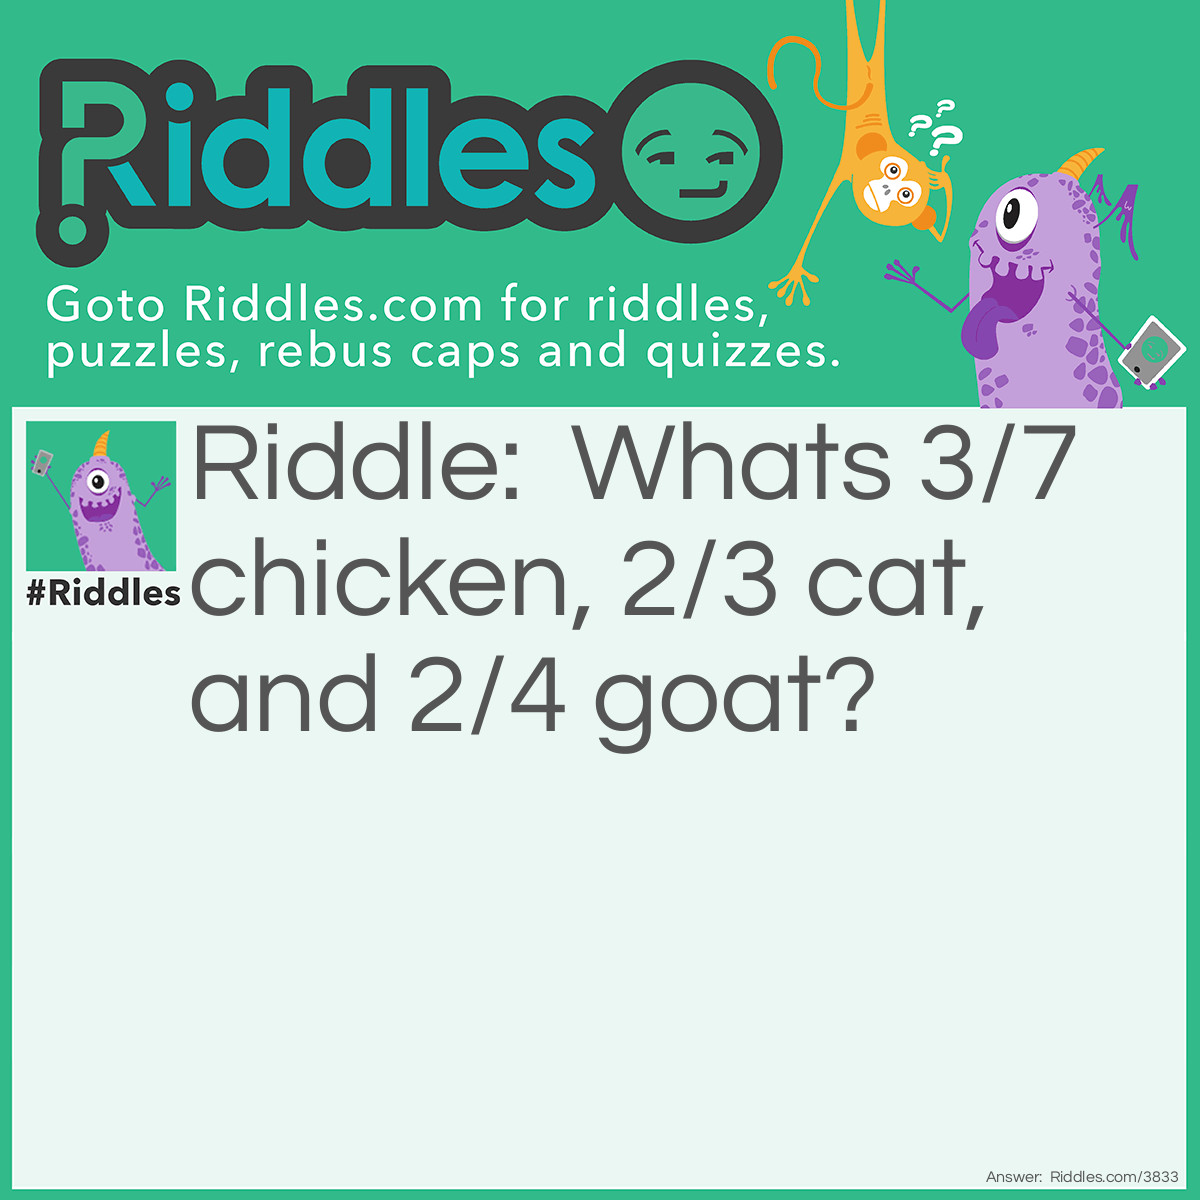 Riddle: What's 3/7 chicken, 2/3 cat, and 2/4 goat? Answer: Chicago. The first three words out of seven of chicken is CHI, the first two words out of 3 of cat is CA, and first two words out of goat is GO. Therefore making, (CHI)(CA)(GO).